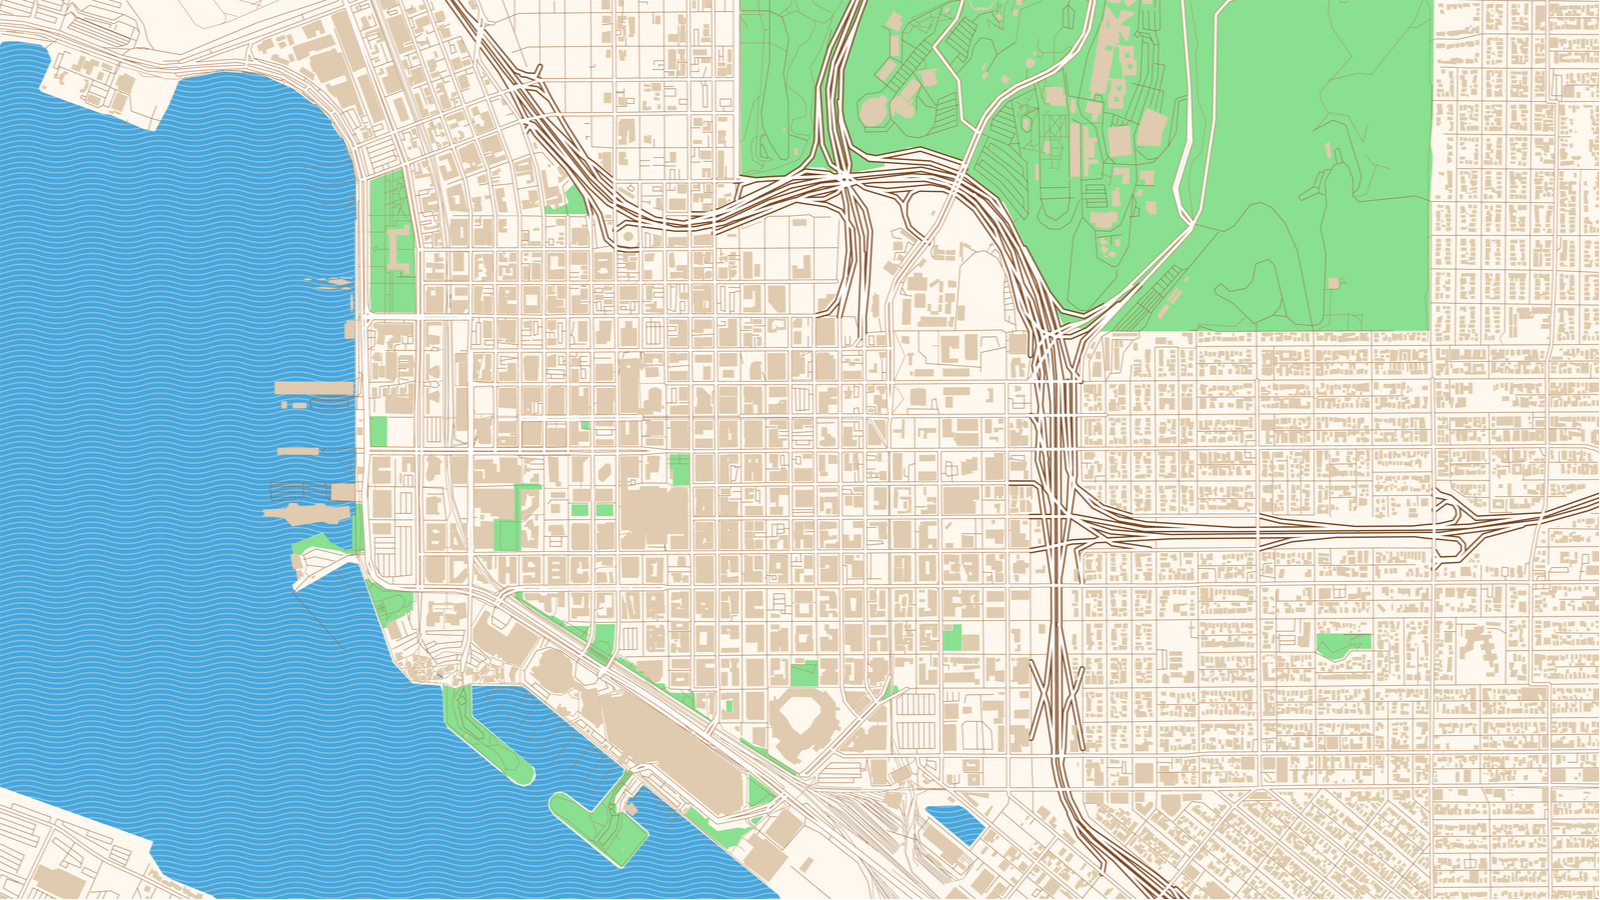 Vector image of a map in San Diego showing the best places to stay